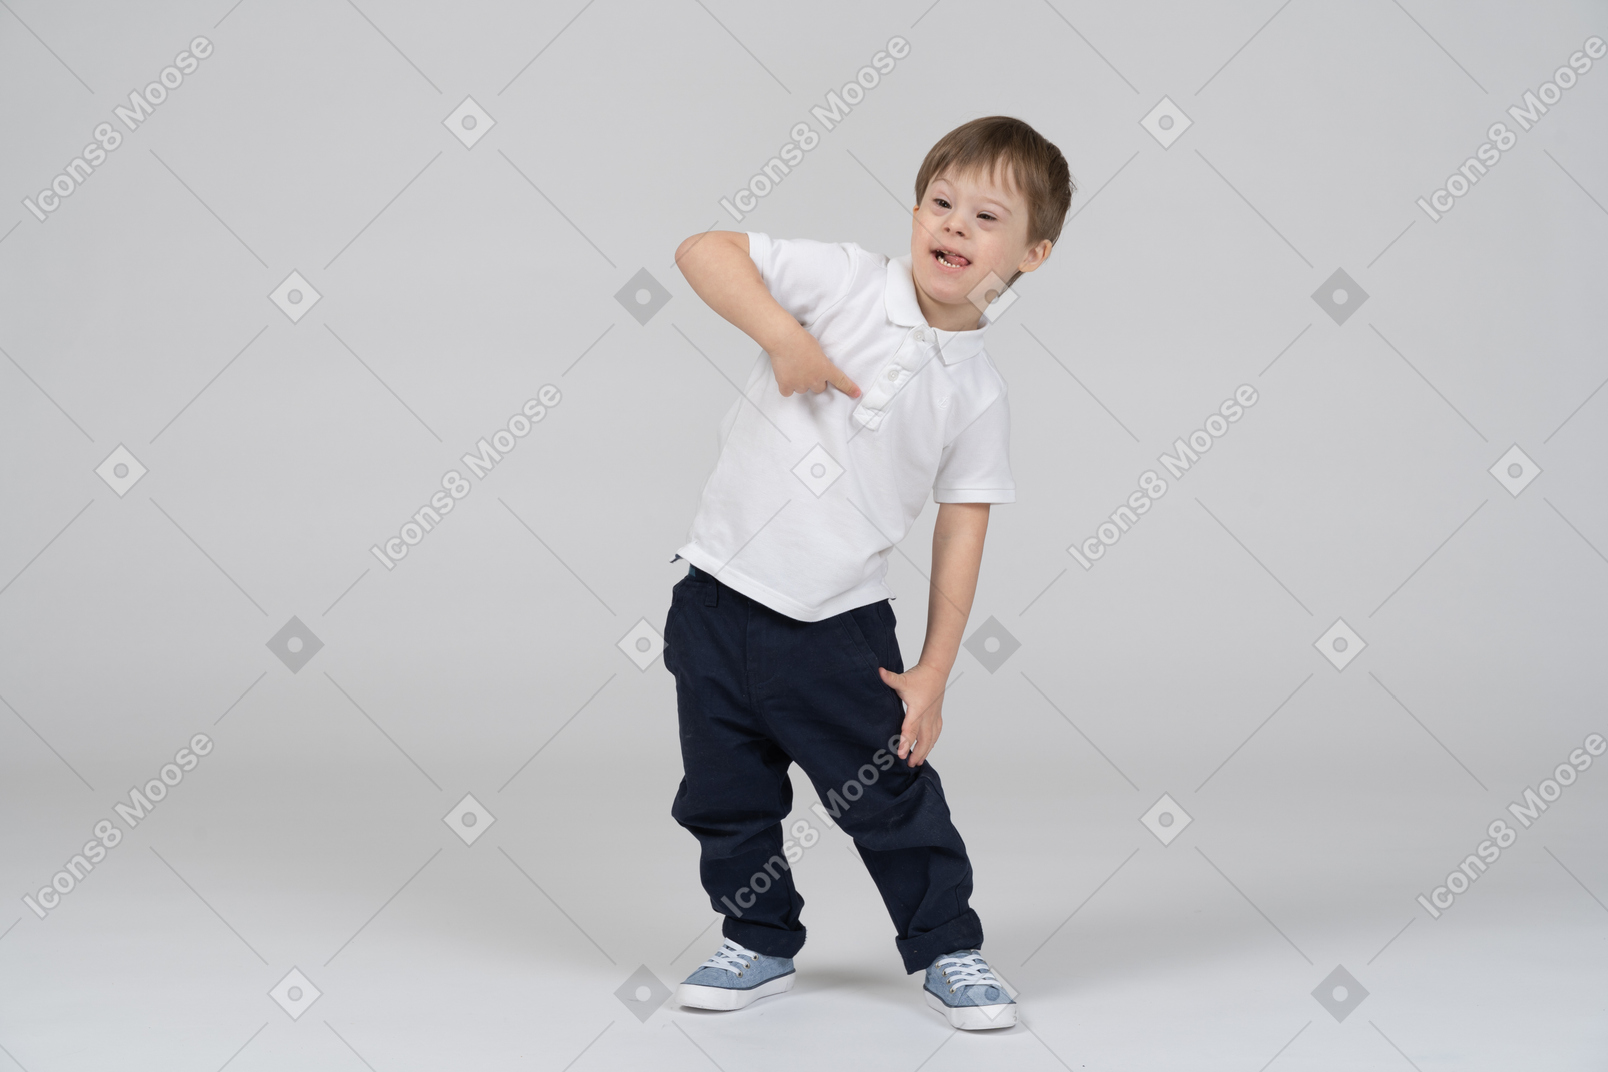 Front view of a cheerful boy pointing at himself